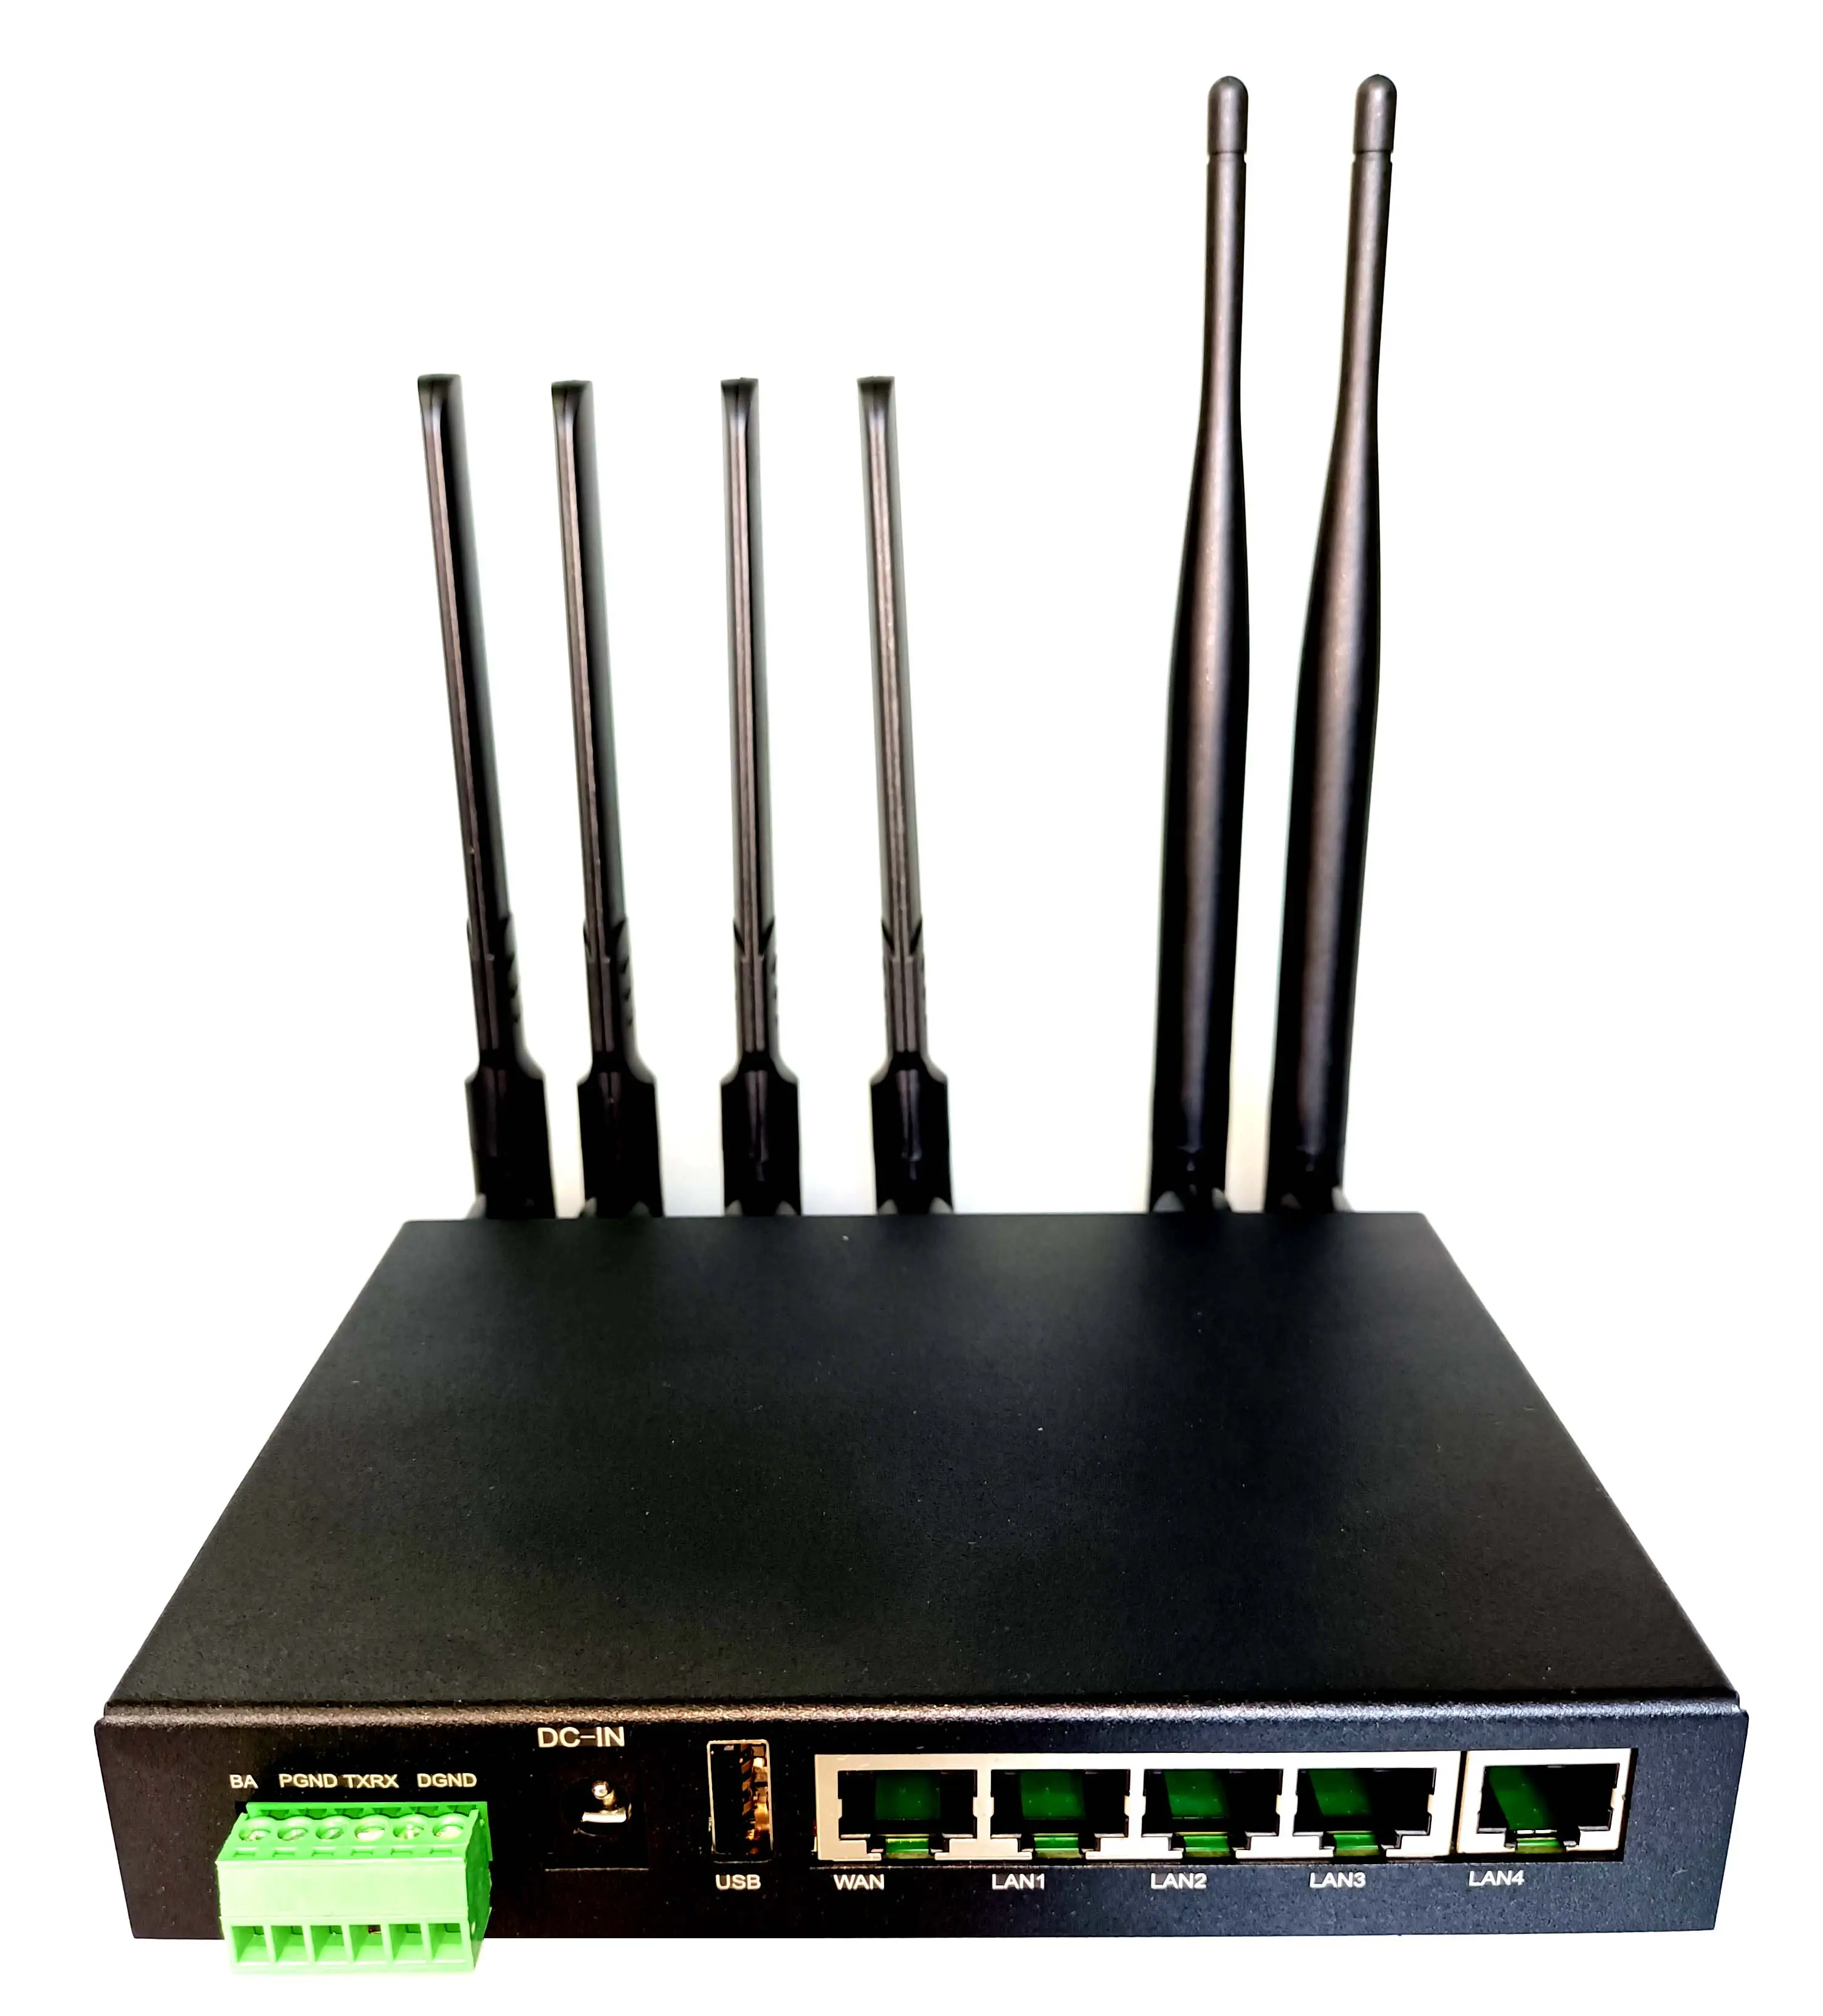 5G high speed industrial router with dual frequency WIFI 2.4Ghz & 5Ghz dual SIM slot for video streaming and CCTV